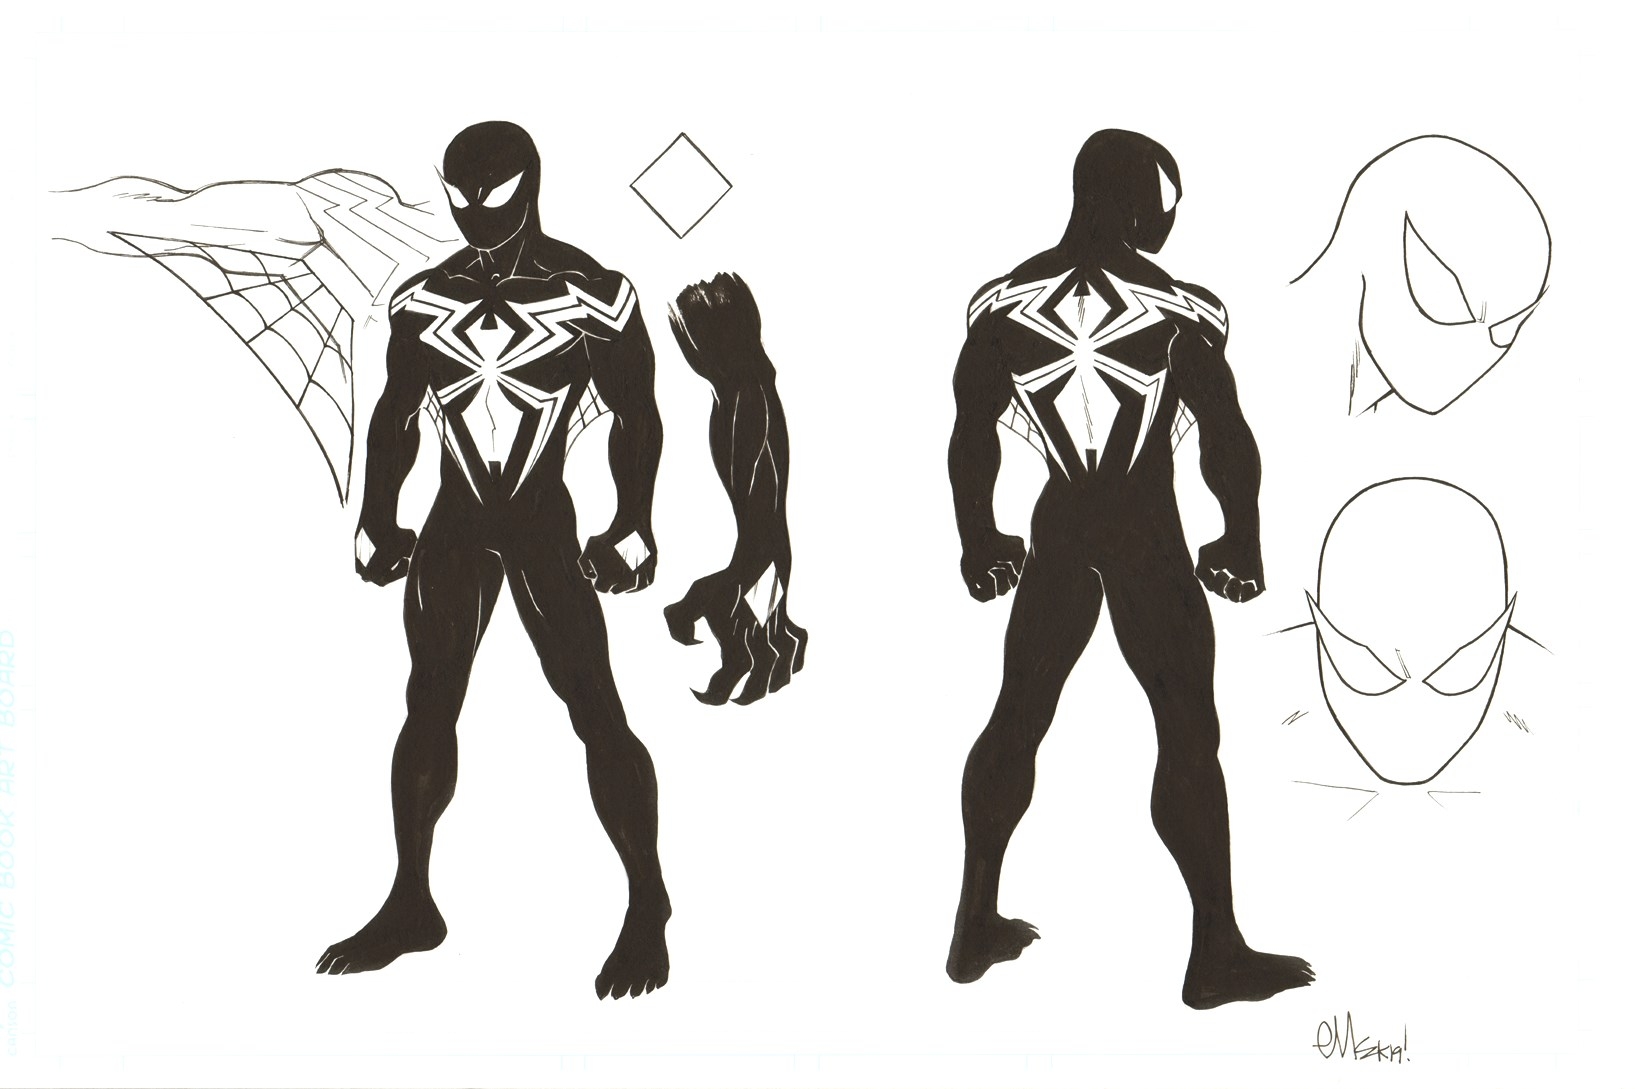 Here is a drawing of Spiderman VS Venom the symbiote Concept fan